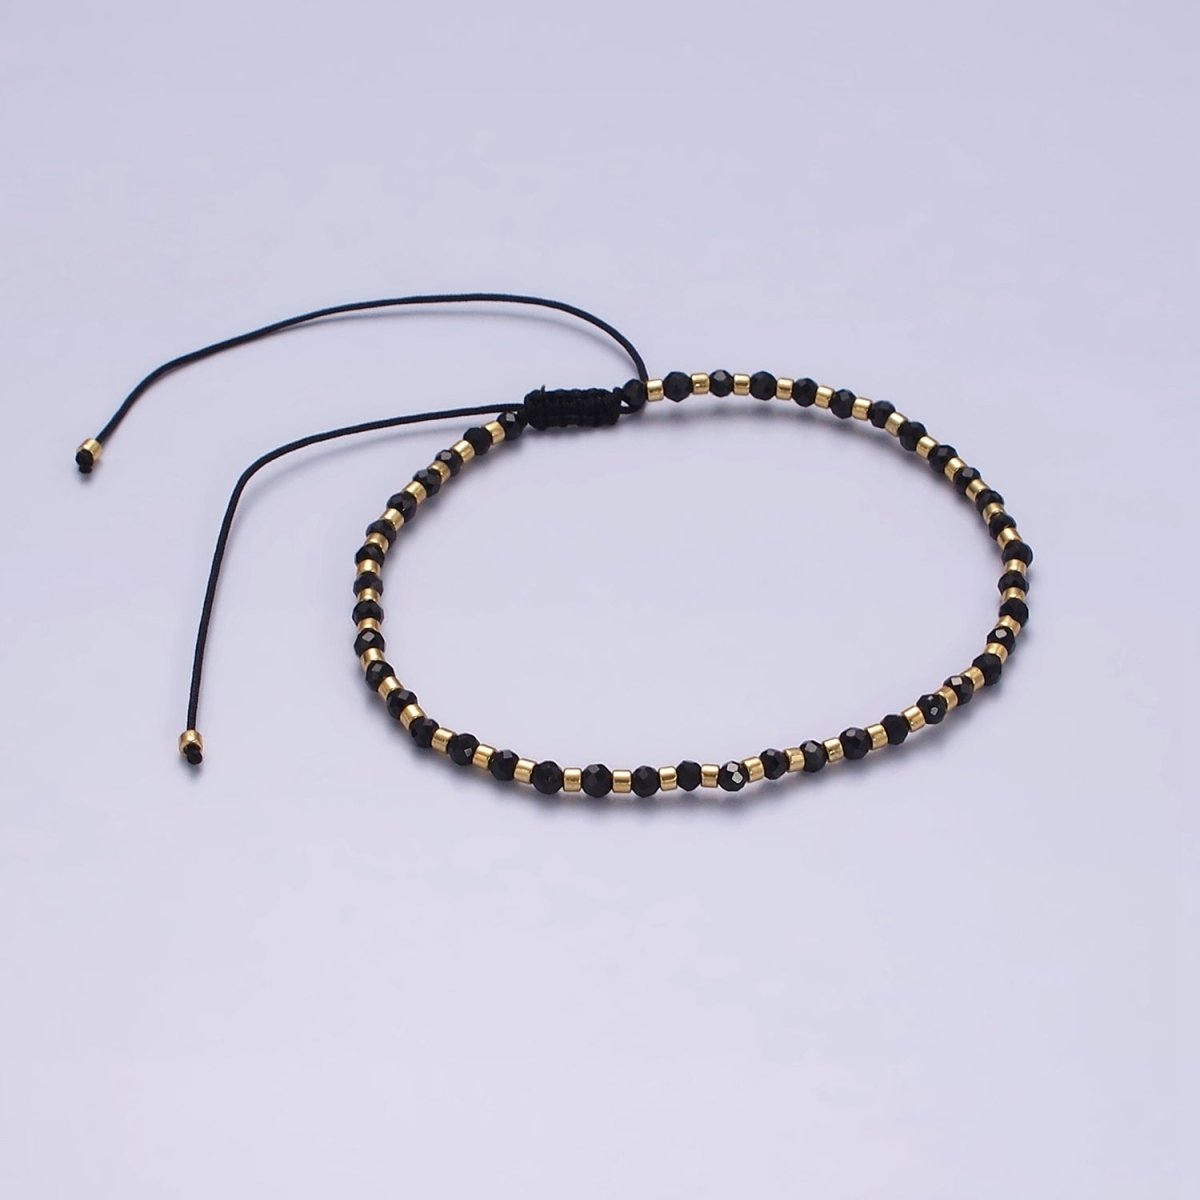 14K Gold Filled Onyx Multifaceted Black Rope Adjustable Friendship Bracelet | WA-2165 - WA-2167 Clearance Pricing - DLUXCA